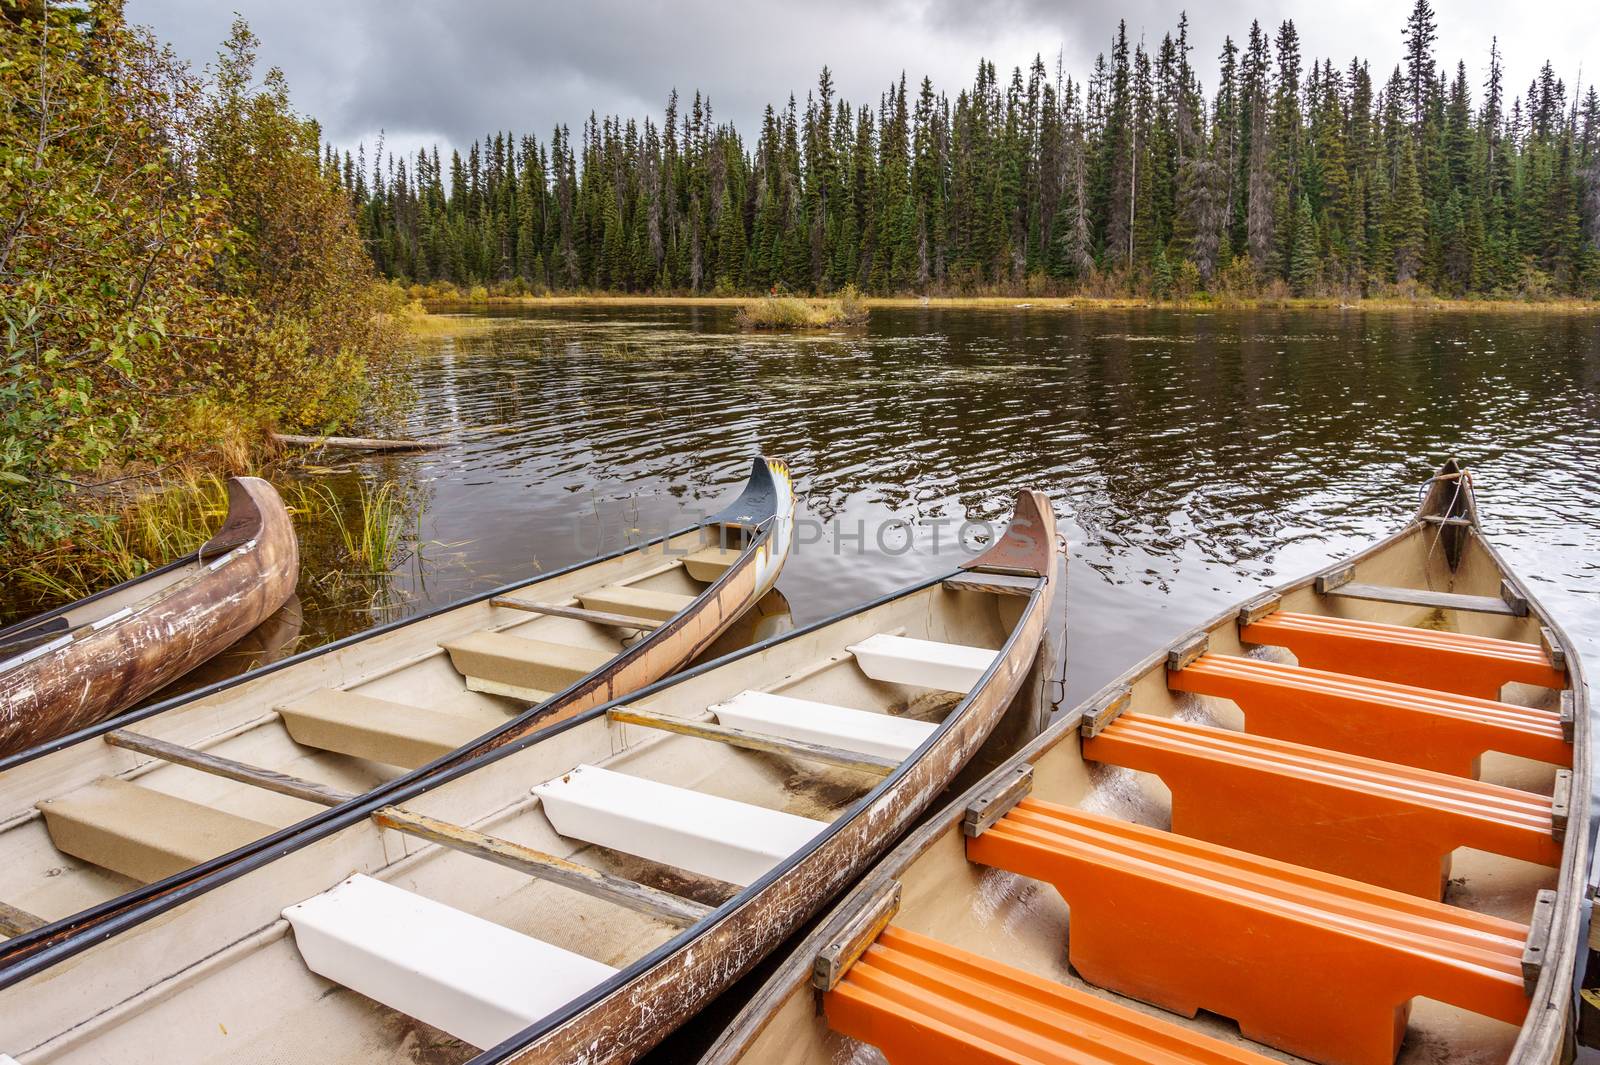 Canoes moored in McGillivray Lake in the Shuswap Highlands in central British Columbia with surrounding trees reflecting on the water